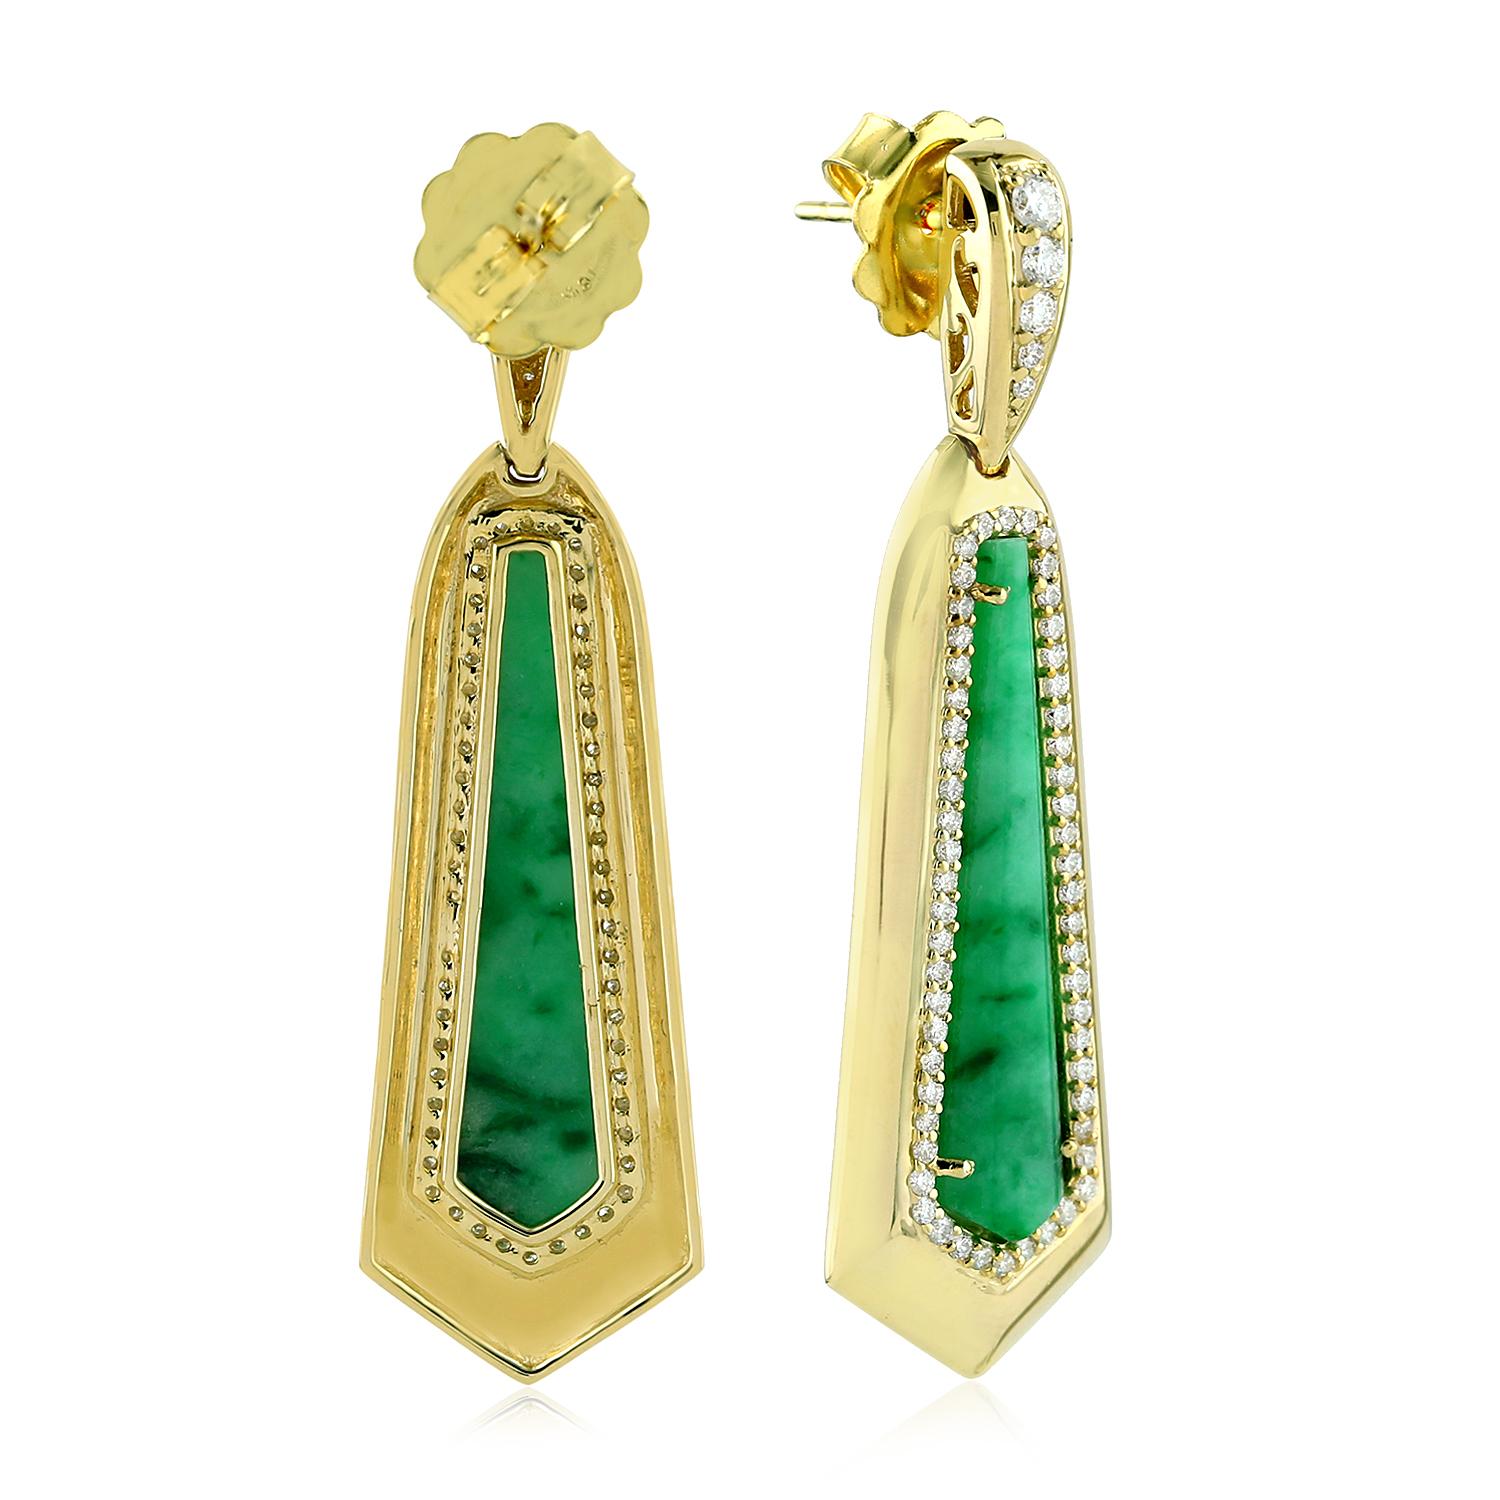 Contemporary 8.45 ct Jade Dangle Earrings With diamonds Made In 18k Yellow Gold For Sale